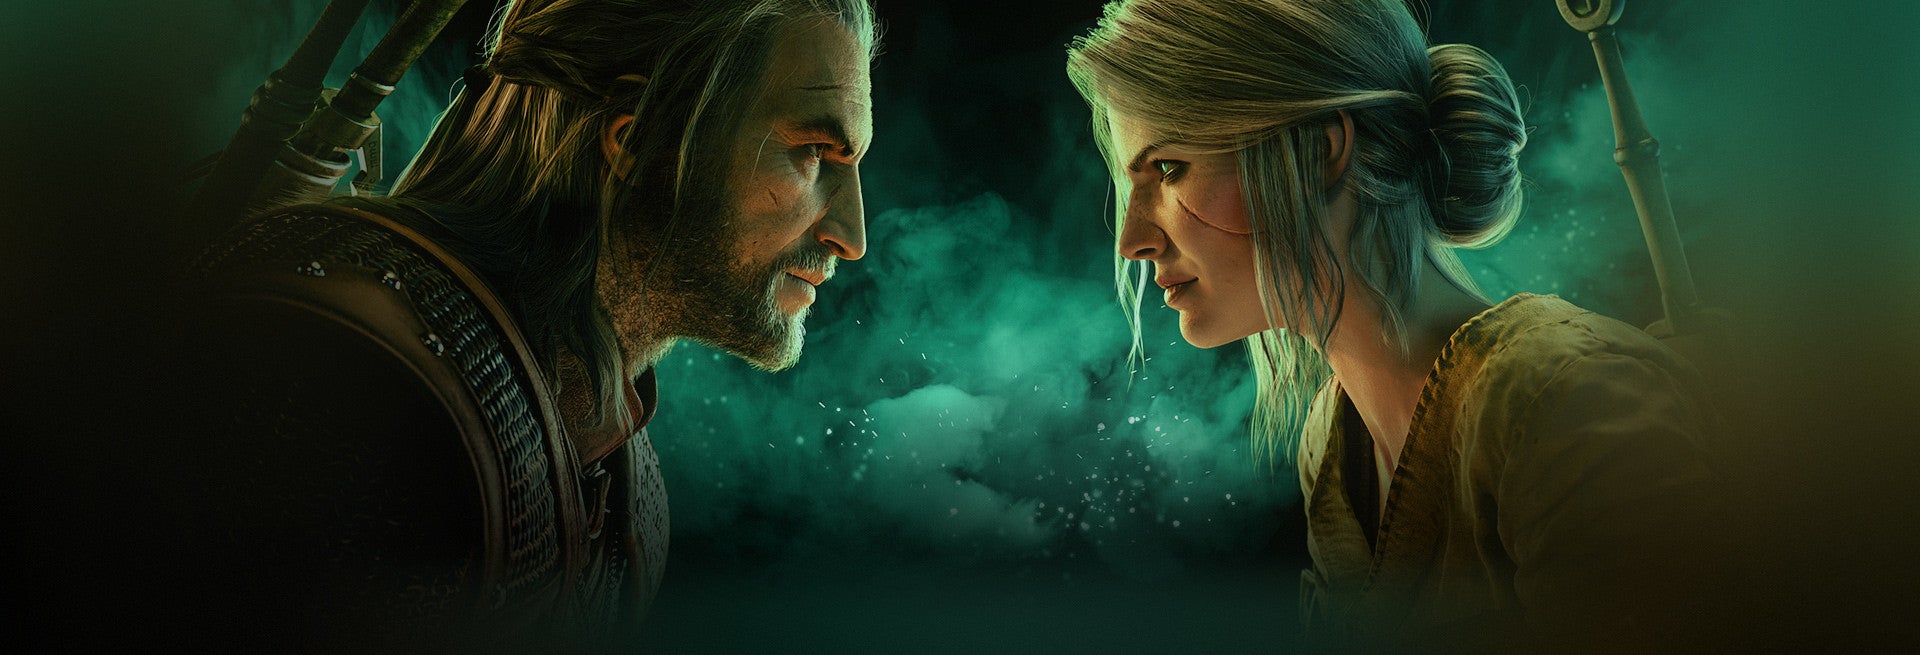 The Gwent Chronicles update adds 24 new cards to the mobile game